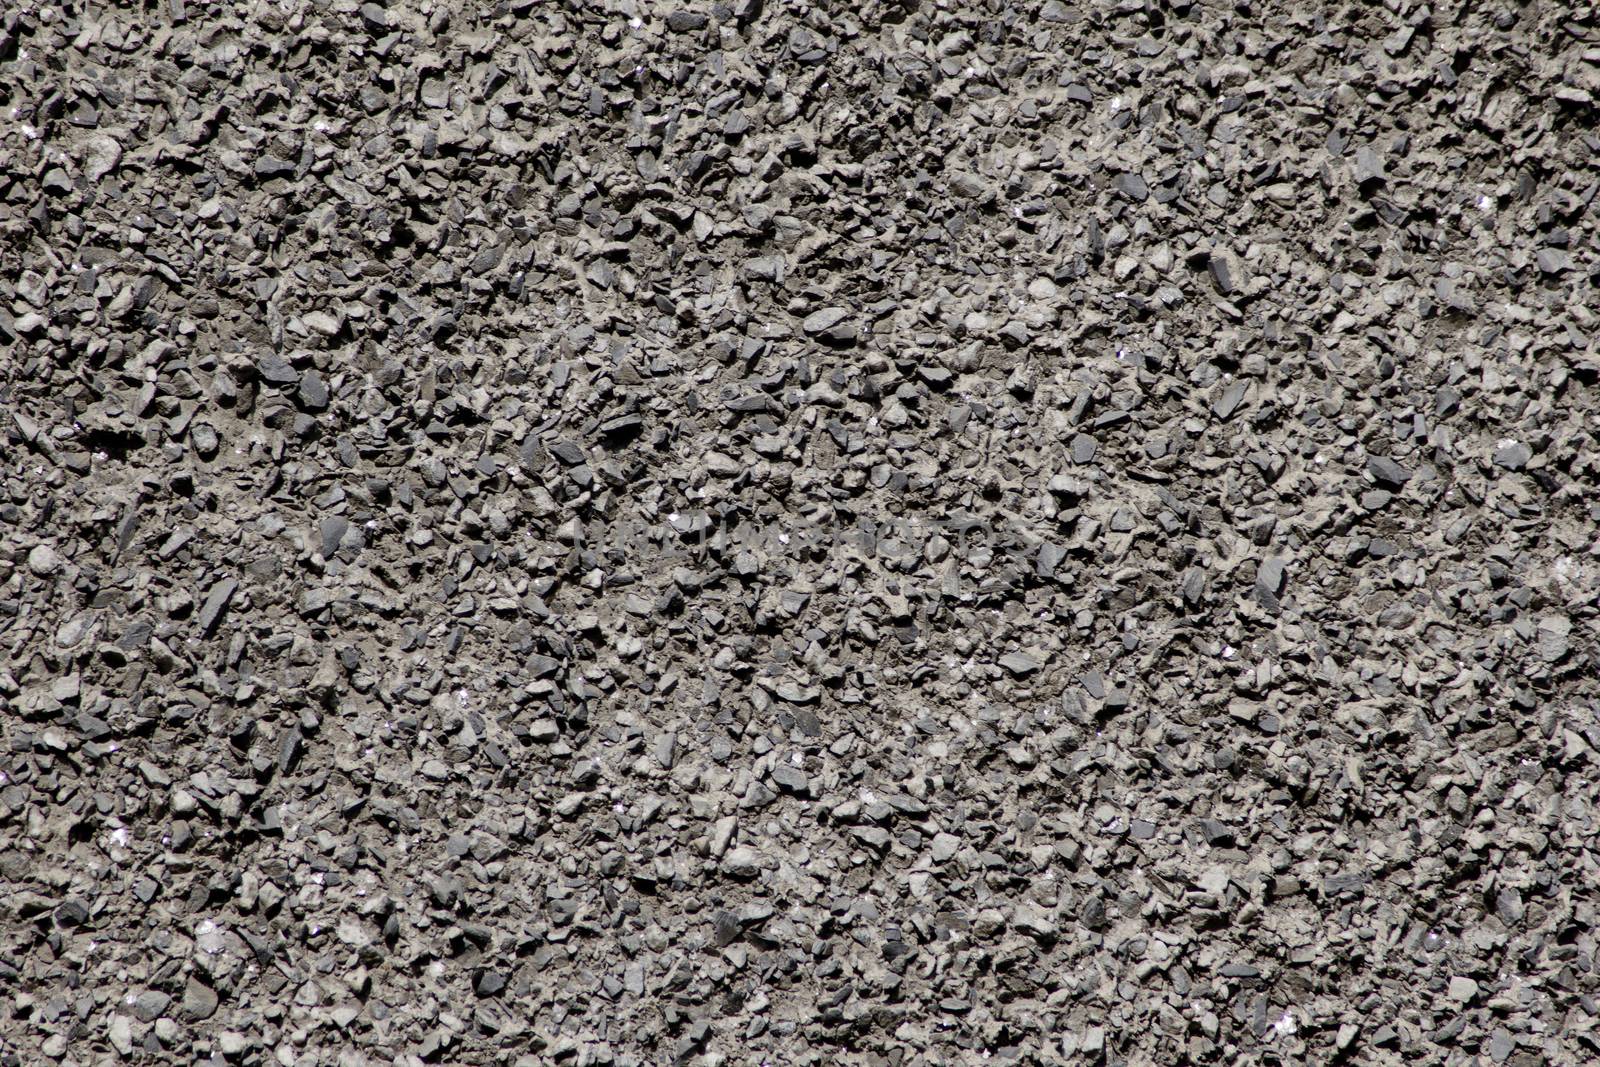 The wall consists of stone chips of dark color on a flat surface.